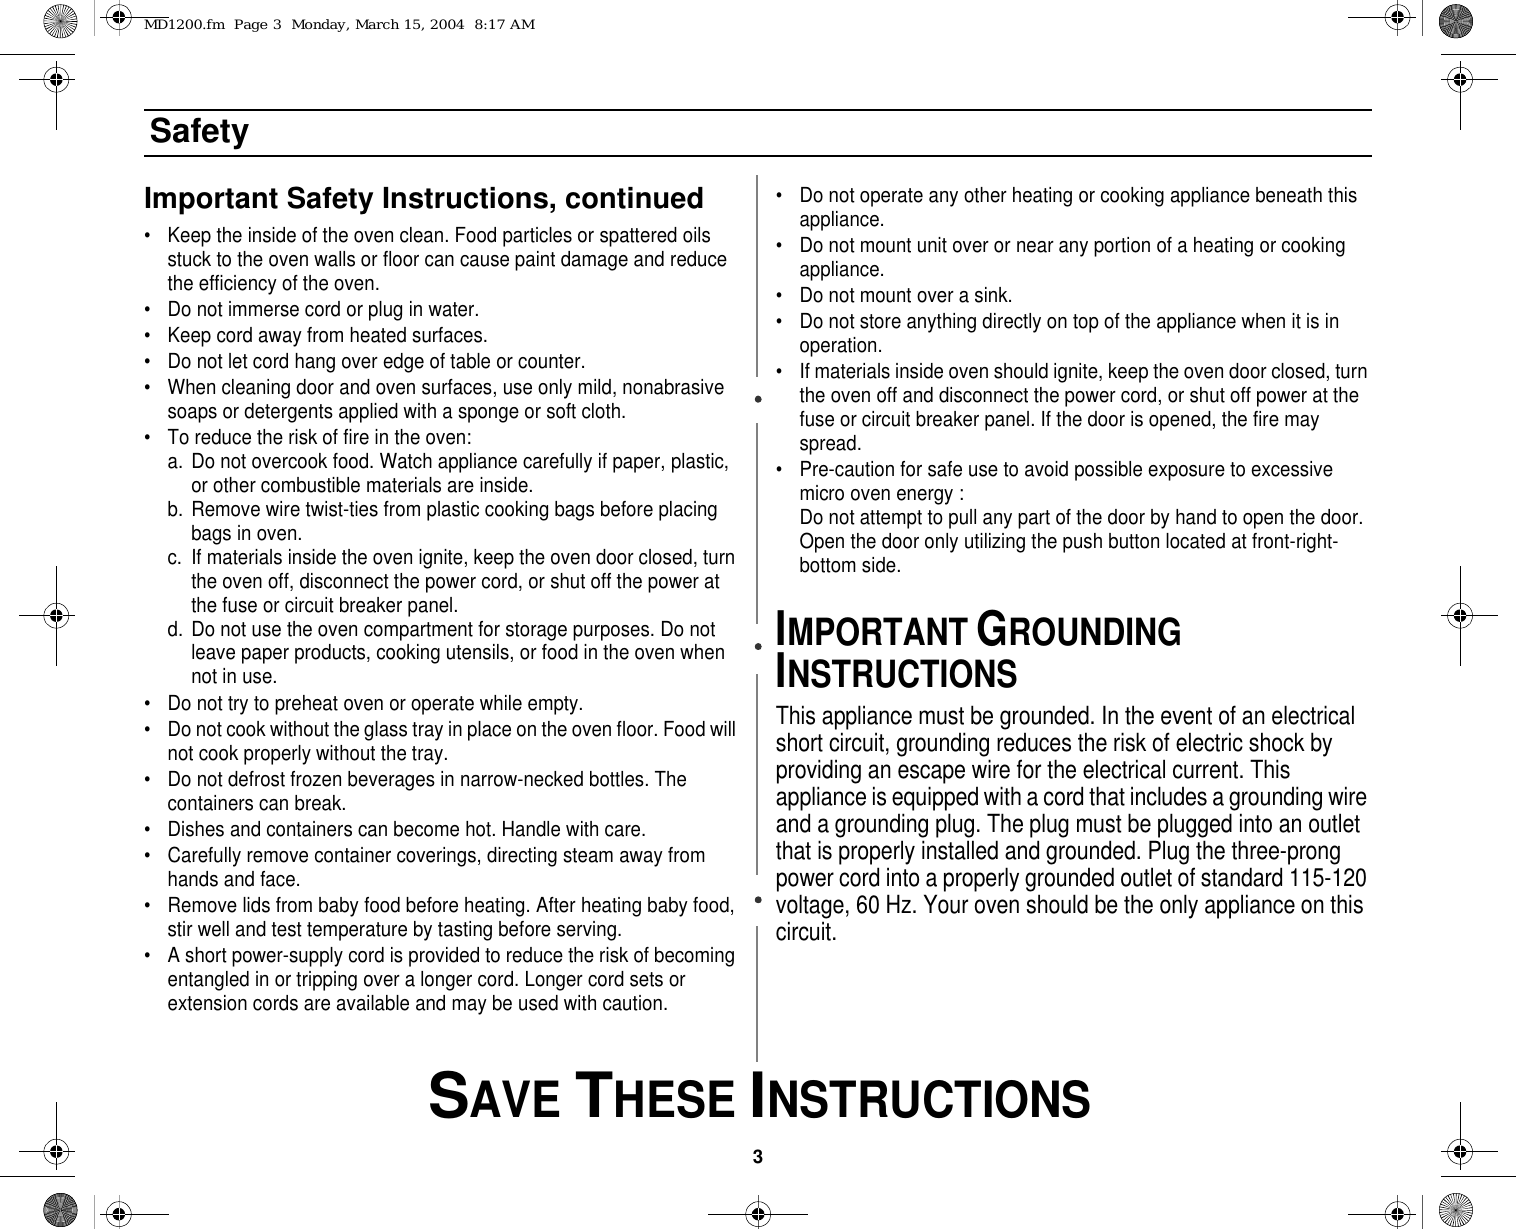 3 SAVE THESE INSTRUCTIONSSafetyImportant Safety Instructions, continued• Keep the inside of the oven clean. Food particles or spattered oils stuck to the oven walls or floor can cause paint damage and reduce the efficiency of the oven.• Do not immerse cord or plug in water.• Keep cord away from heated surfaces.• Do not let cord hang over edge of table or counter.• When cleaning door and oven surfaces, use only mild, nonabrasive soaps or detergents applied with a sponge or soft cloth.• To reduce the risk of fire in the oven:a. Do not overcook food. Watch appliance carefully if paper, plastic, or other combustible materials are inside.b. Remove wire twist-ties from plastic cooking bags before placing bags in oven.c. If materials inside the oven ignite, keep the oven door closed, turn the oven off, disconnect the power cord, or shut off the power at the fuse or circuit breaker panel.d. Do not use the oven compartment for storage purposes. Do not leave paper products, cooking utensils, or food in the oven when not in use.• Do not try to preheat oven or operate while empty.• Do not cook without the glass tray in place on the oven floor. Food will not cook properly without the tray.• Do not defrost frozen beverages in narrow-necked bottles. The containers can break.• Dishes and containers can become hot. Handle with care.• Carefully remove container coverings, directing steam away from hands and face.• Remove lids from baby food before heating. After heating baby food, stir well and test temperature by tasting before serving.• A short power-supply cord is provided to reduce the risk of becoming entangled in or tripping over a longer cord. Longer cord sets or extension cords are available and may be used with caution. • Do not operate any other heating or cooking appliance beneath this appliance.• Do not mount unit over or near any portion of a heating or cooking appliance.• Do not mount over a sink.• Do not store anything directly on top of the appliance when it is in operation.• If materials inside oven should ignite, keep the oven door closed, turn the oven off and disconnect the power cord, or shut off power at the fuse or circuit breaker panel. If the door is opened, the fire may spread.• Pre-caution for safe use to avoid possible exposure to excessive micro oven energy :Do not attempt to pull any part of the door by hand to open the door. Open the door only utilizing the push button located at front-right-bottom side.IMPORTANT GROUNDING INSTRUCTIONSThis appliance must be grounded. In the event of an electrical short circuit, grounding reduces the risk of electric shock by providing an escape wire for the electrical current. This appliance is equipped with a cord that includes a grounding wire and a grounding plug. The plug must be plugged into an outlet that is properly installed and grounded. Plug the three-prong power cord into a properly grounded outlet of standard 115-120 voltage, 60 Hz. Your oven should be the only appliance on this circuit.MD1200.fm  Page 3  Monday, March 15, 2004  8:17 AM